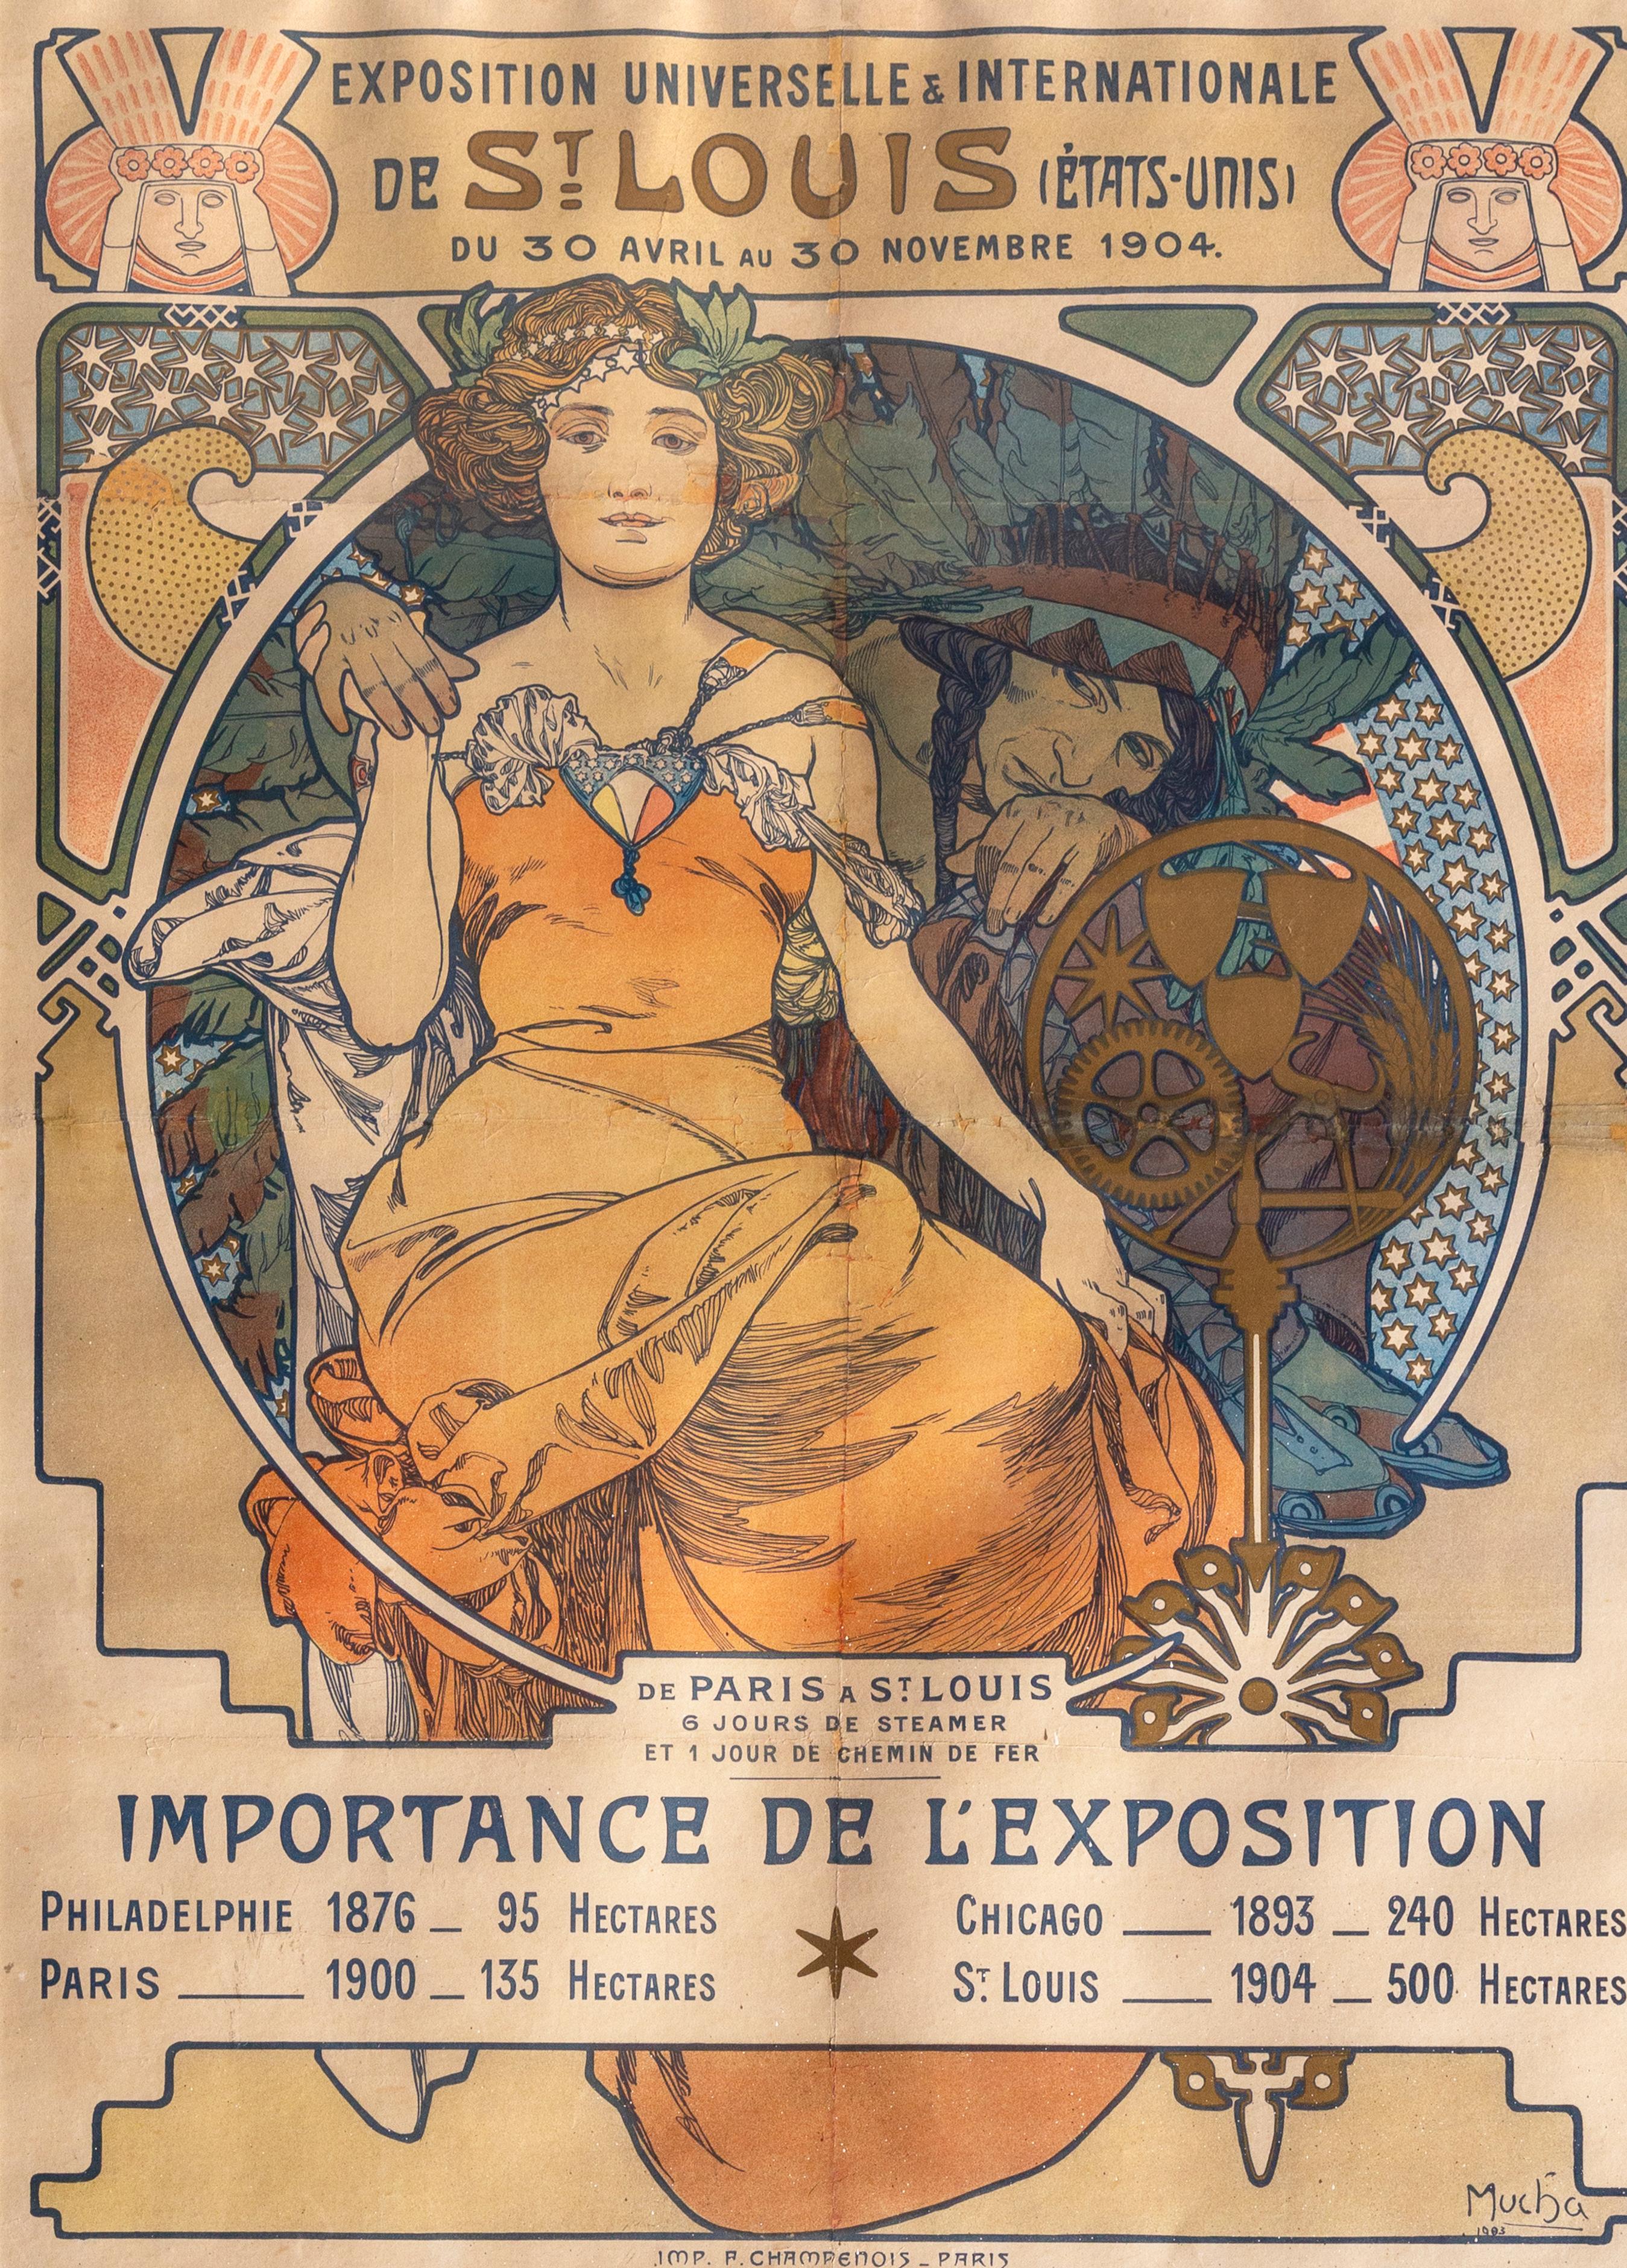 Exposition de St. Louis
Alphonse Mucha, Czech (1860–1939)
Date: 1903
Lithograph Poster
Size: 39 x 28 in. (99.06 x 71.12 cm)
Frame Size: 49 x 38 inches
Printer: F.Champenois, Paris
Reference: Rennert/Weill, no.87 v1